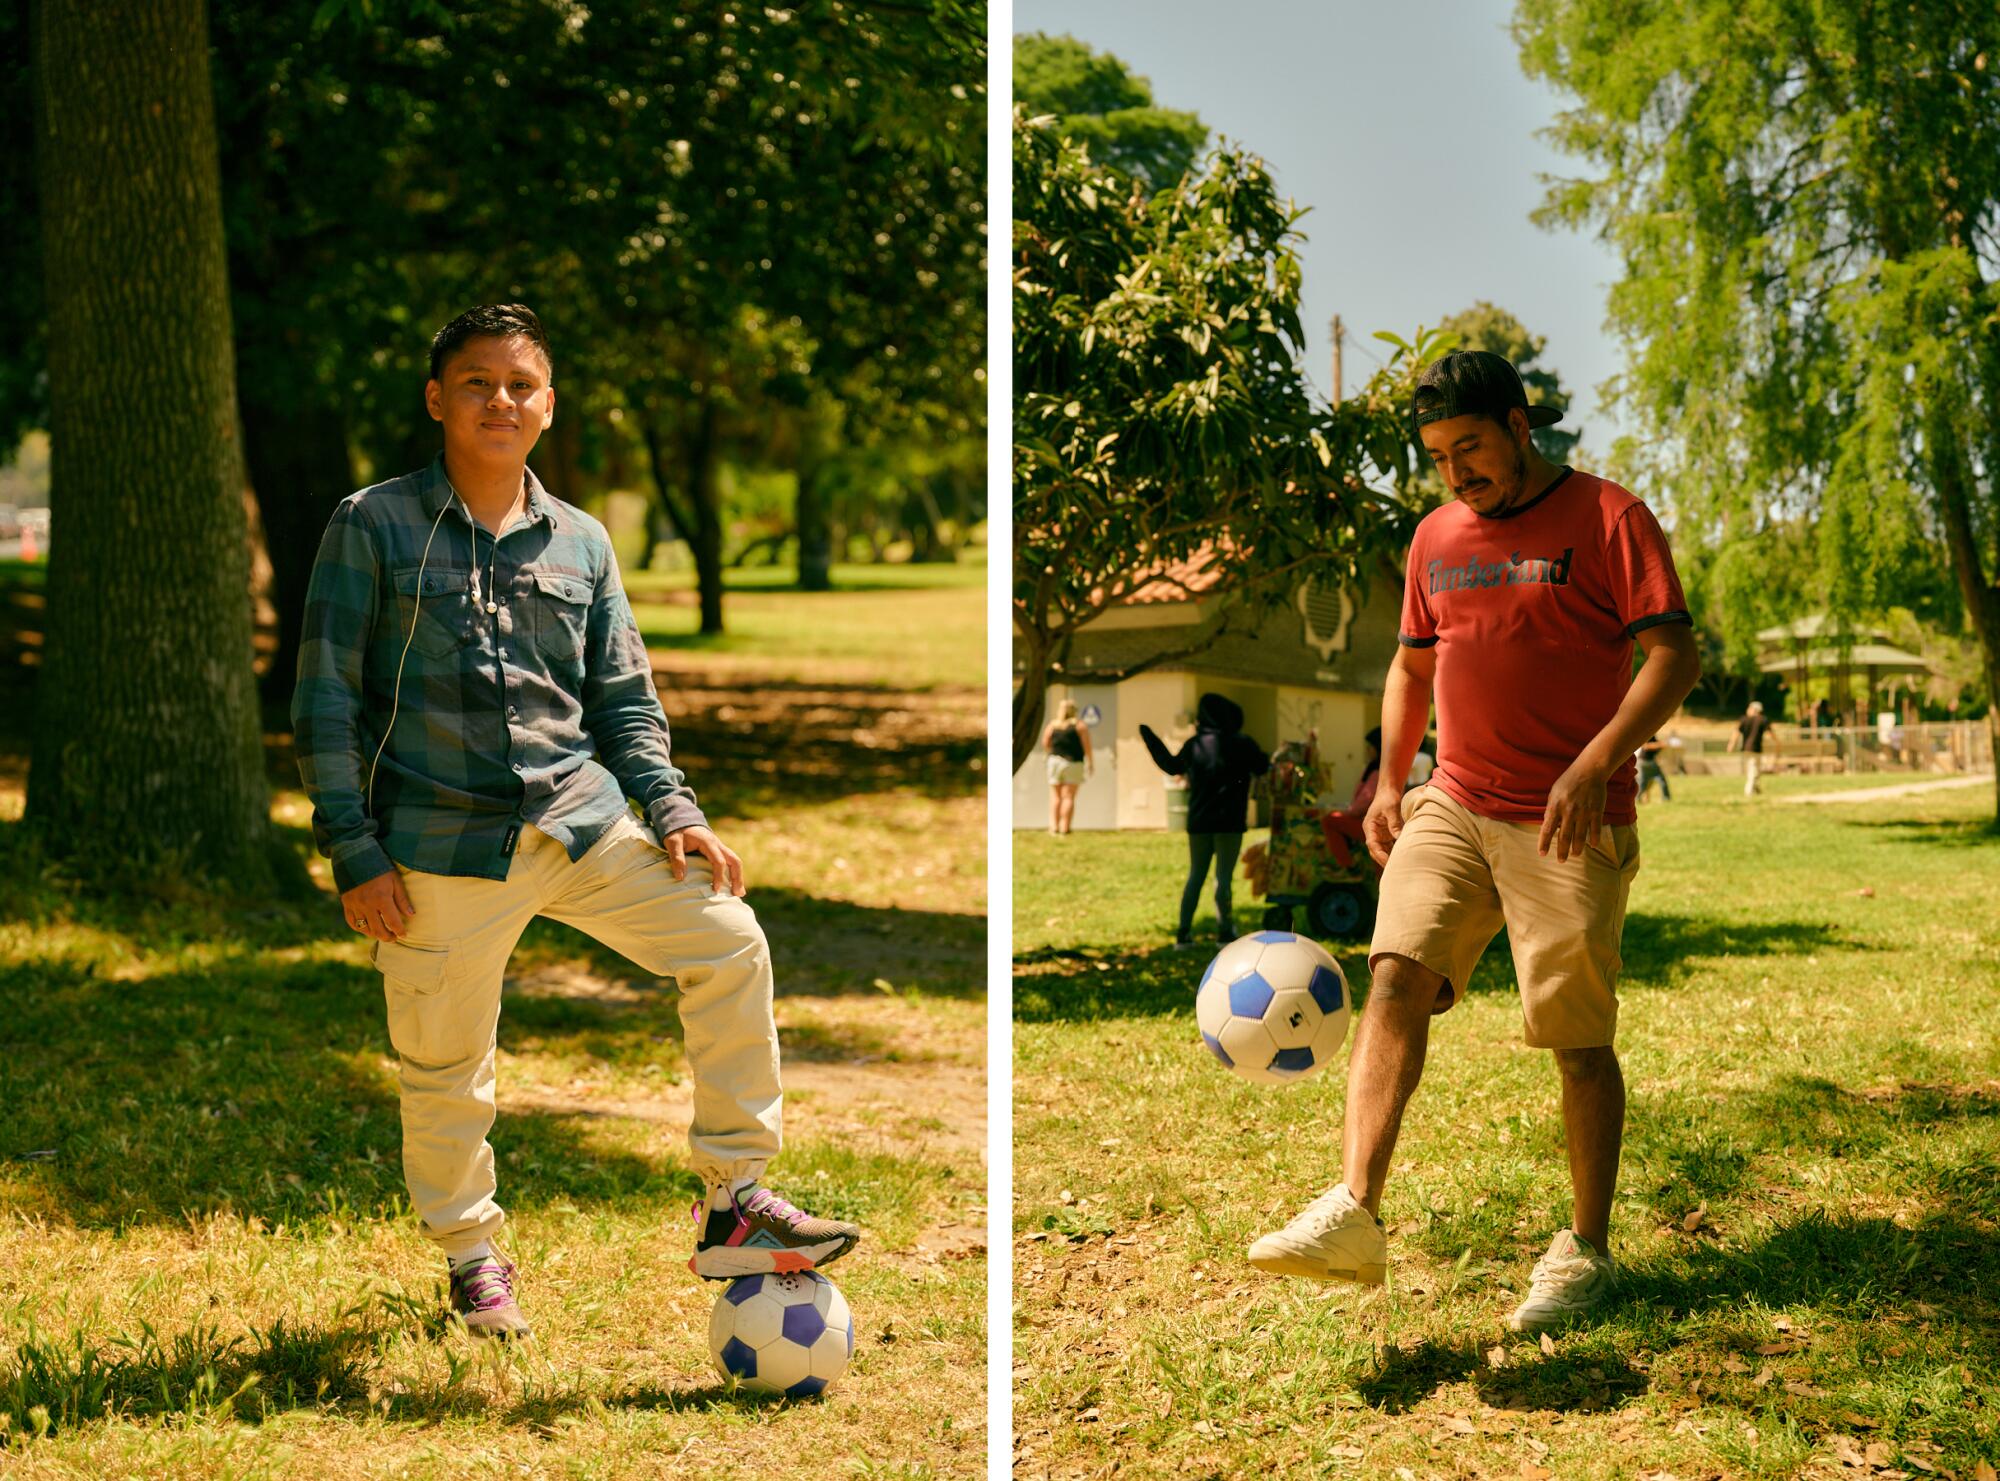 Side-by-side images of a child and a man playing with a soccer ball